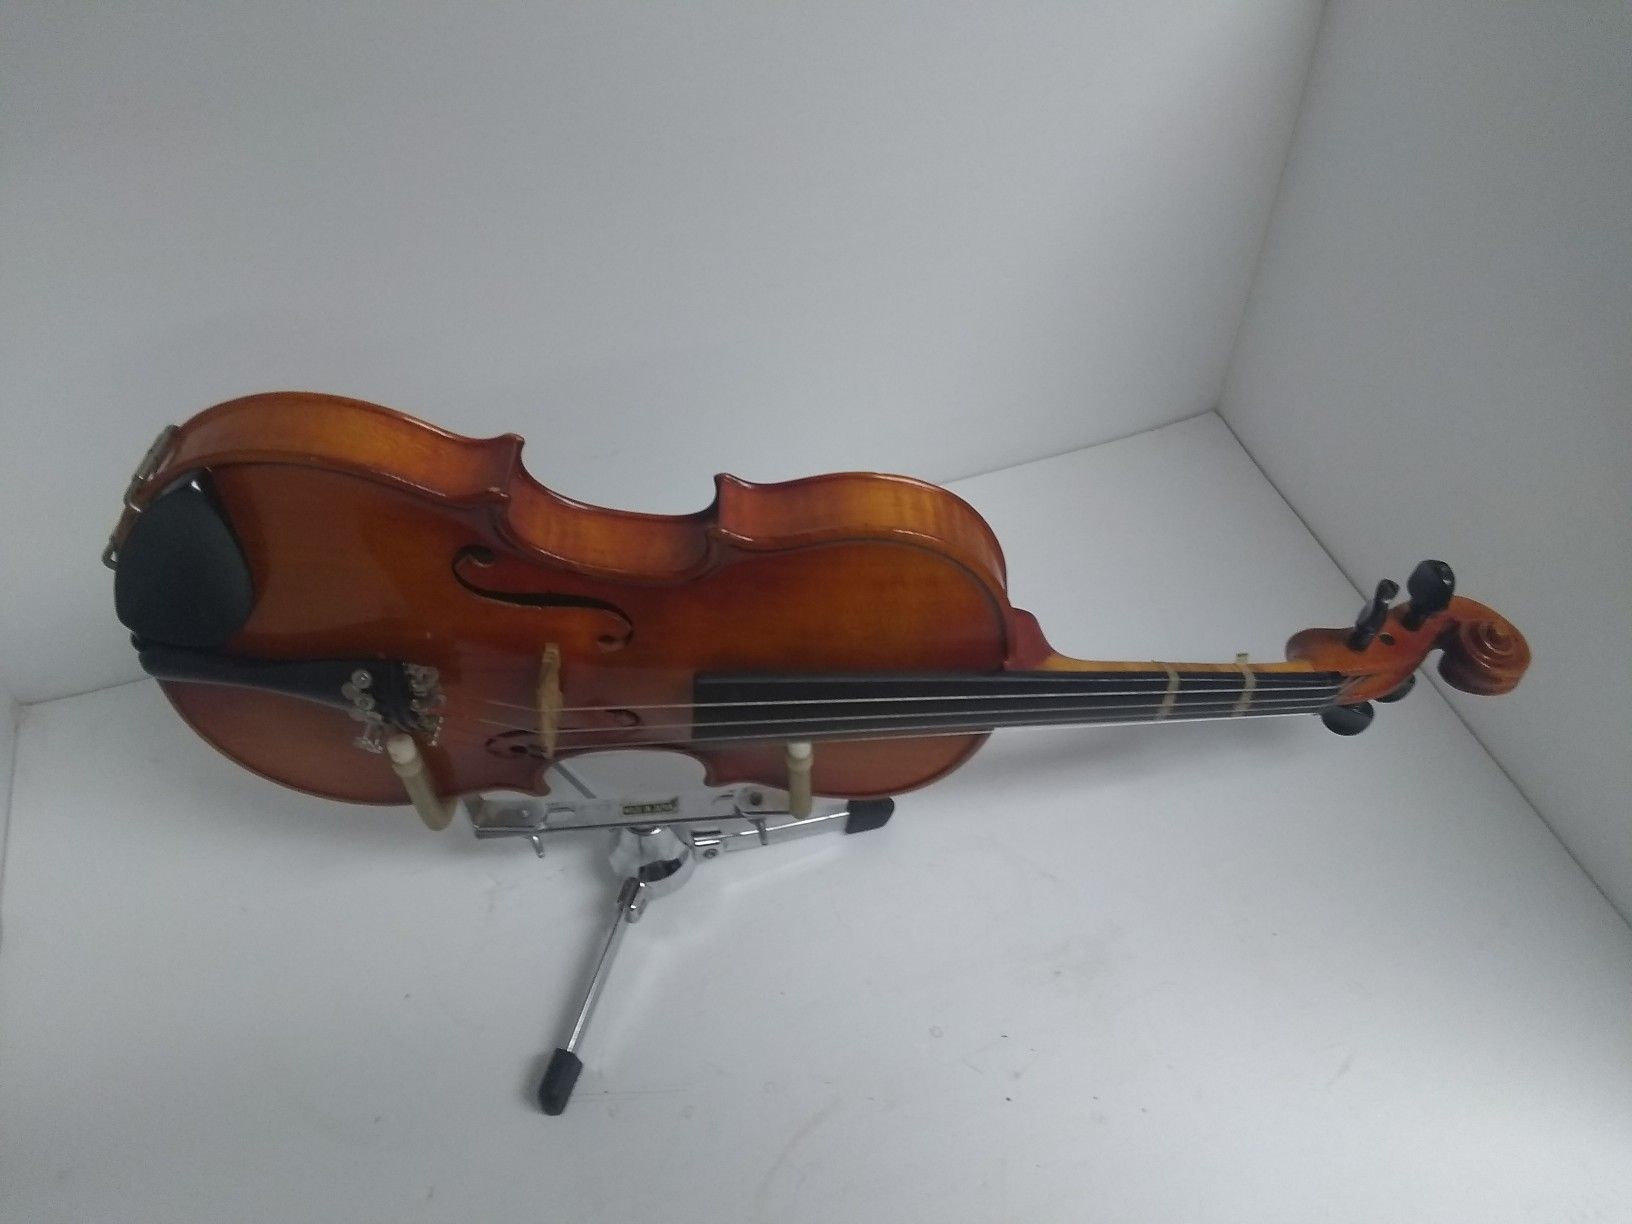 Childs violin holder made in Germany